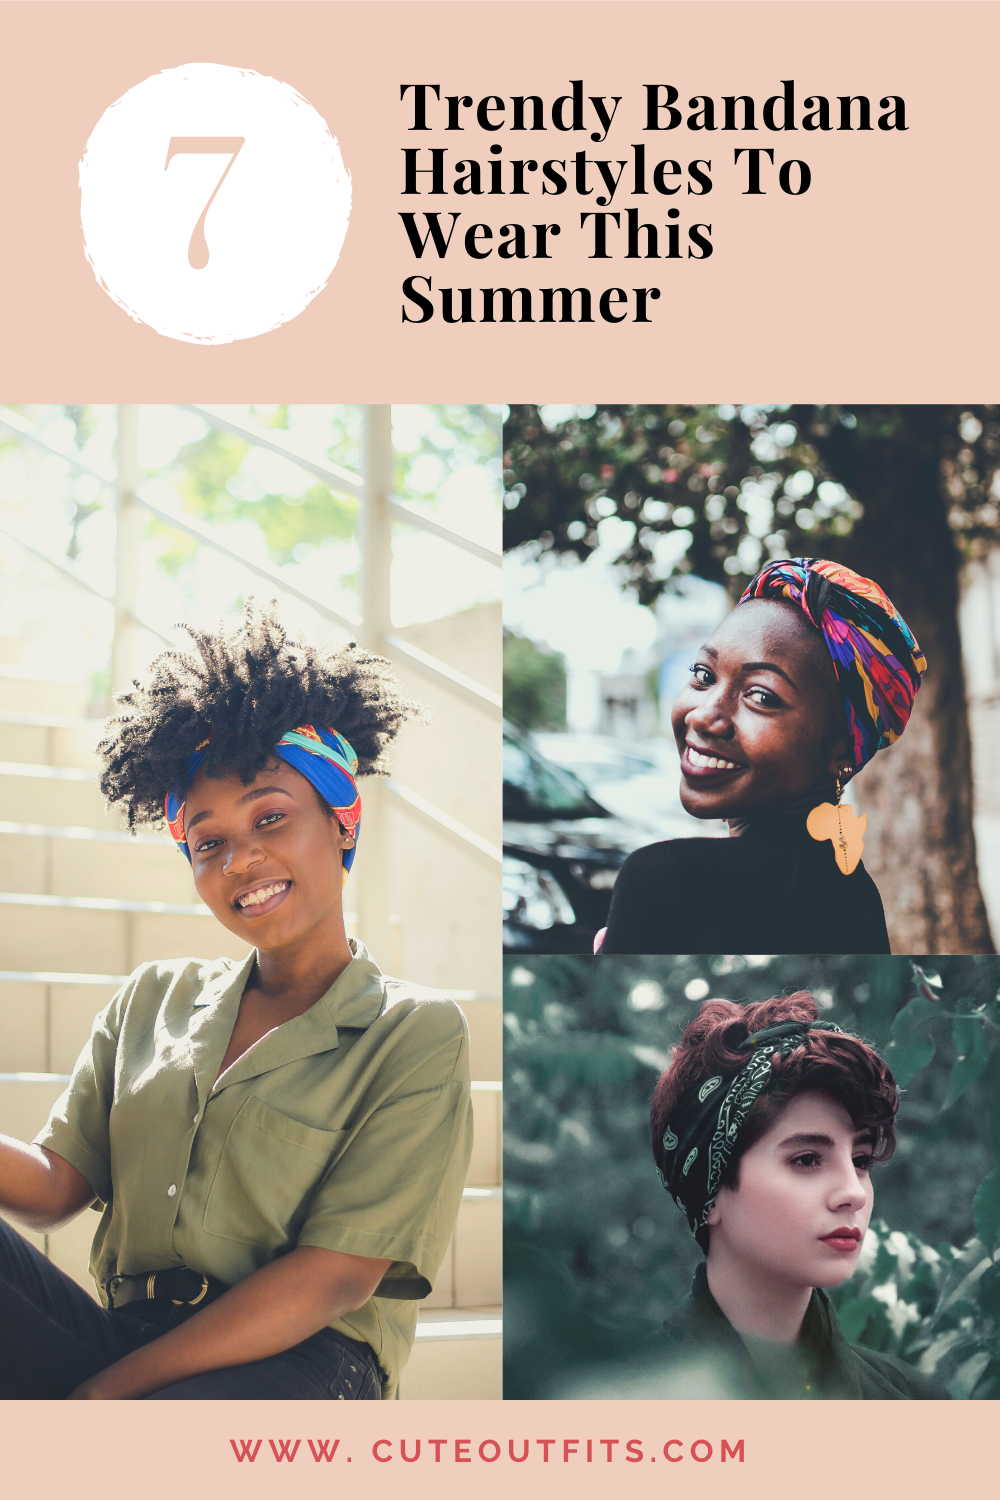 placard | 7 Trendy Bandana Hairstyles To Wear This Summer [For All Ages]